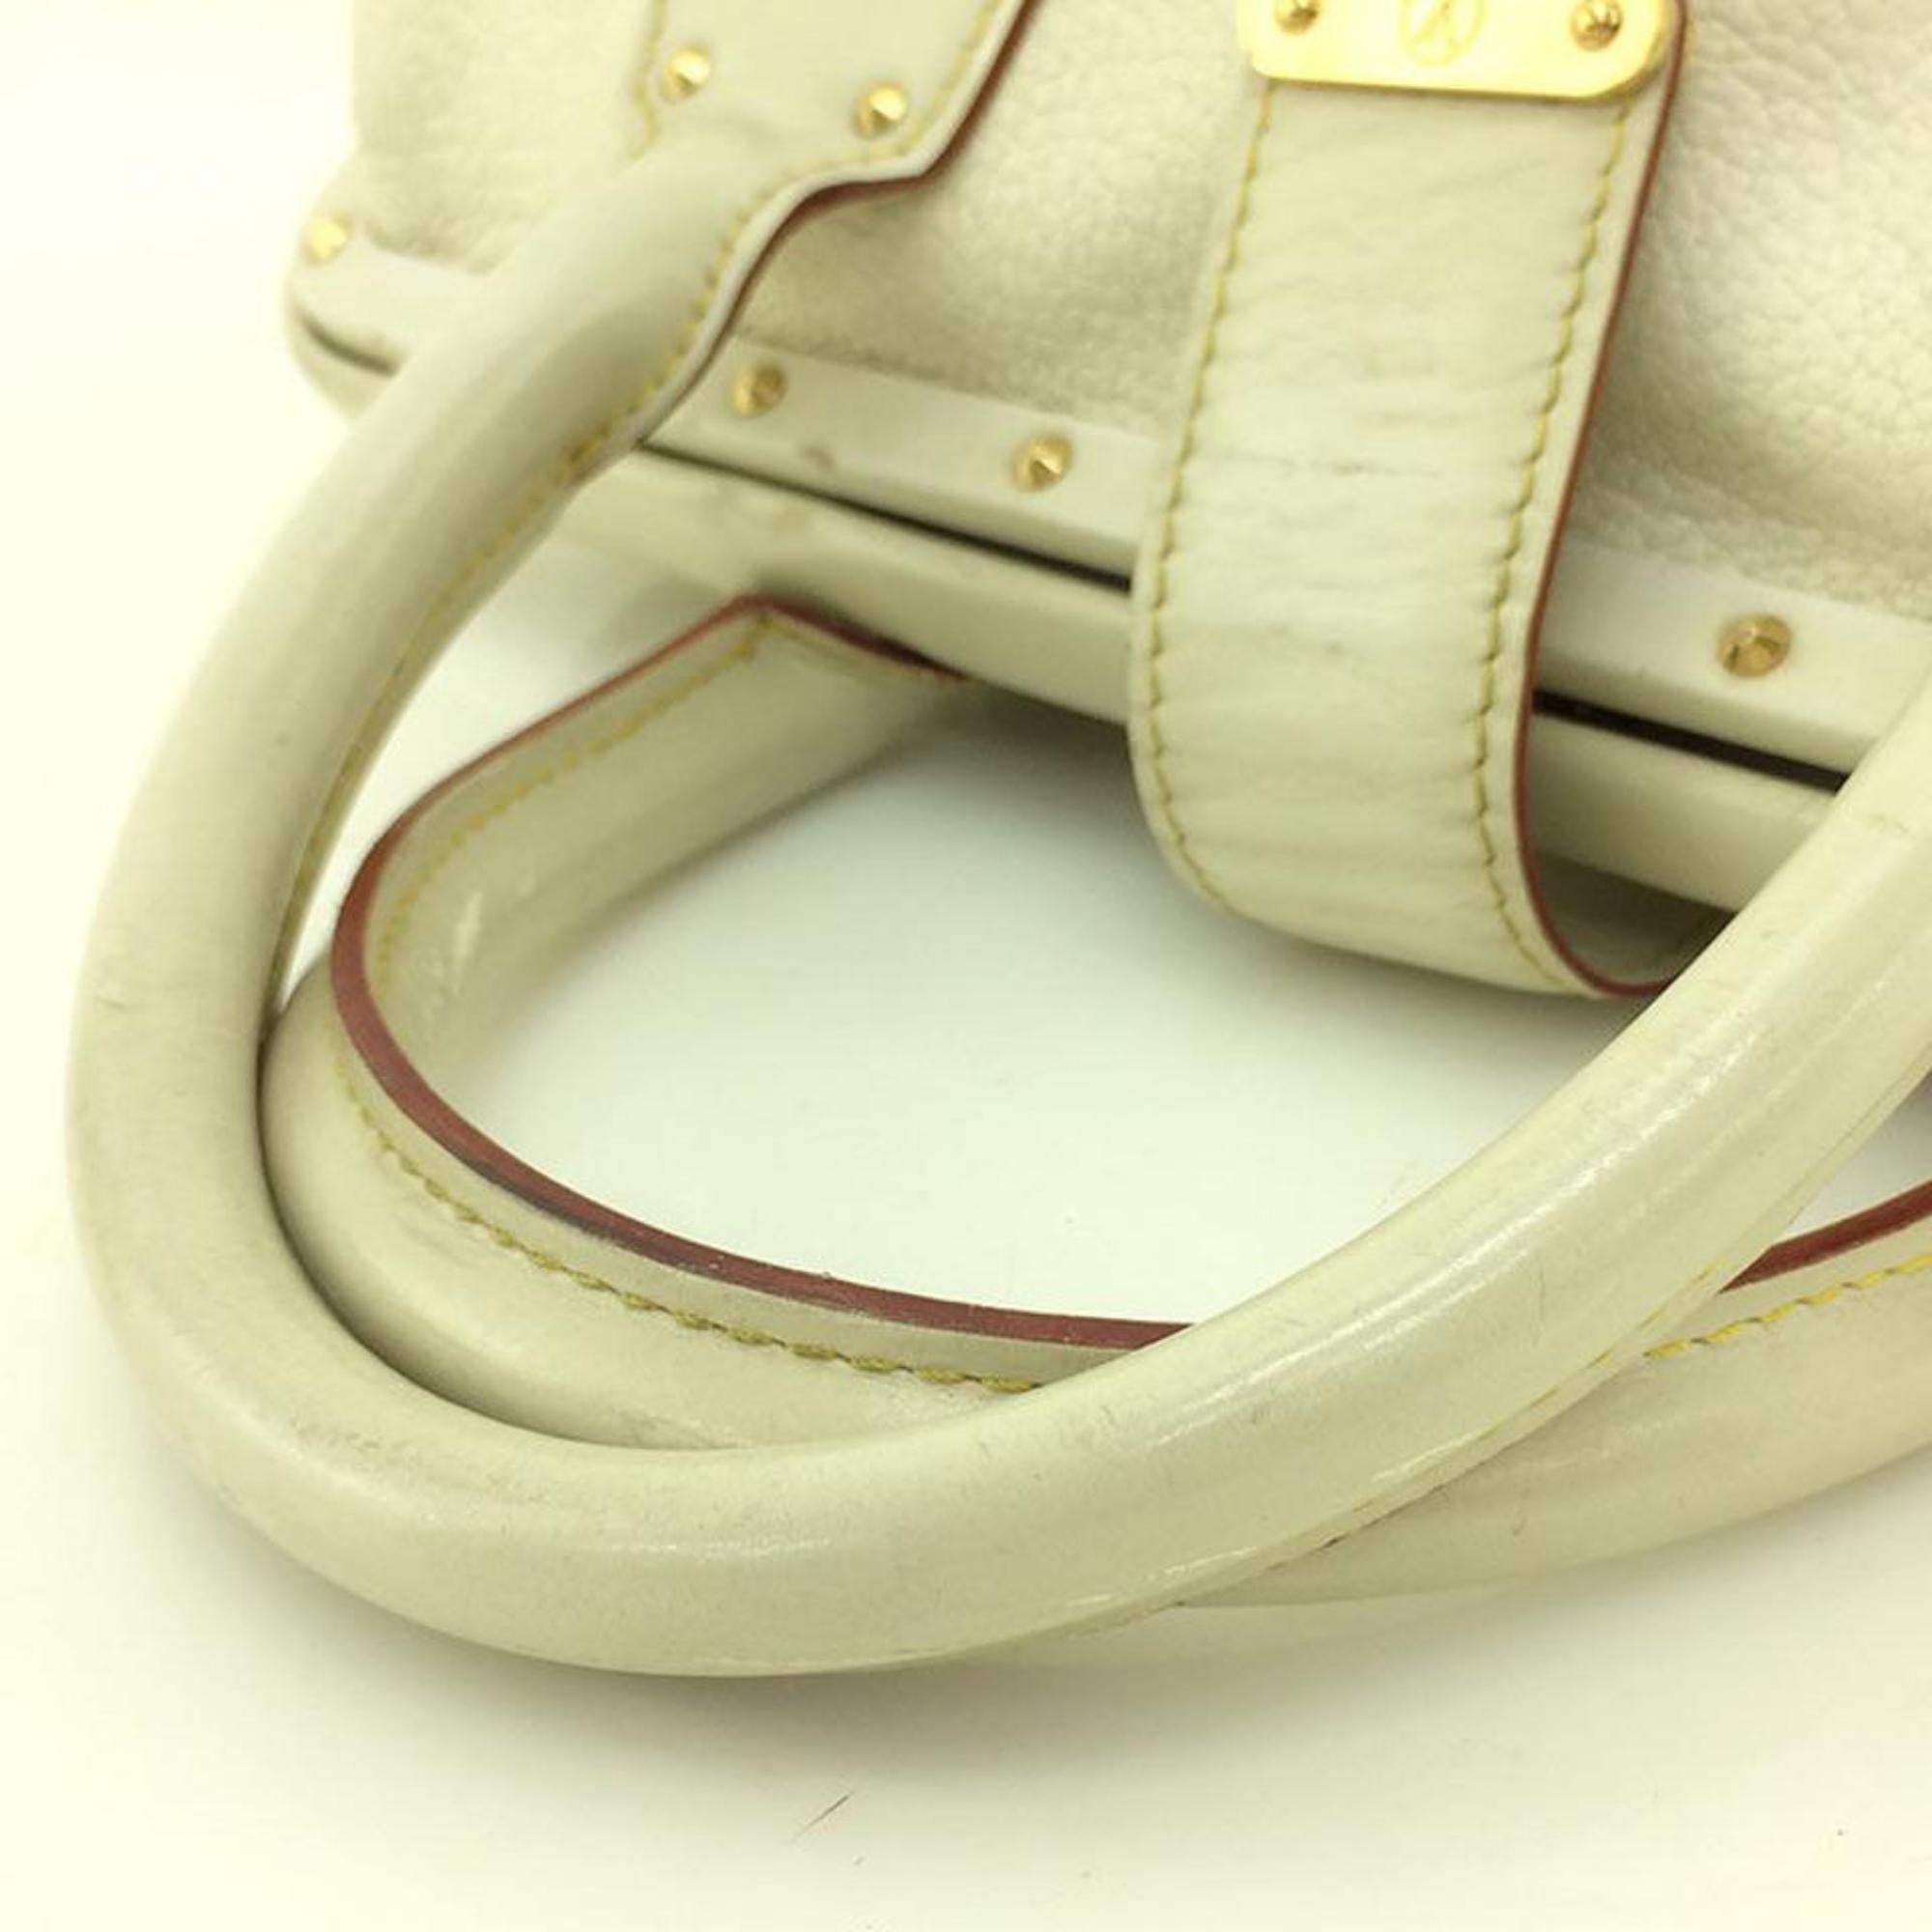 Louis Vuitton L Suhali L'ingenieux Pm Blanc 111924 White Leather Satchel In Fair Condition For Sale In Forest Hills, NY